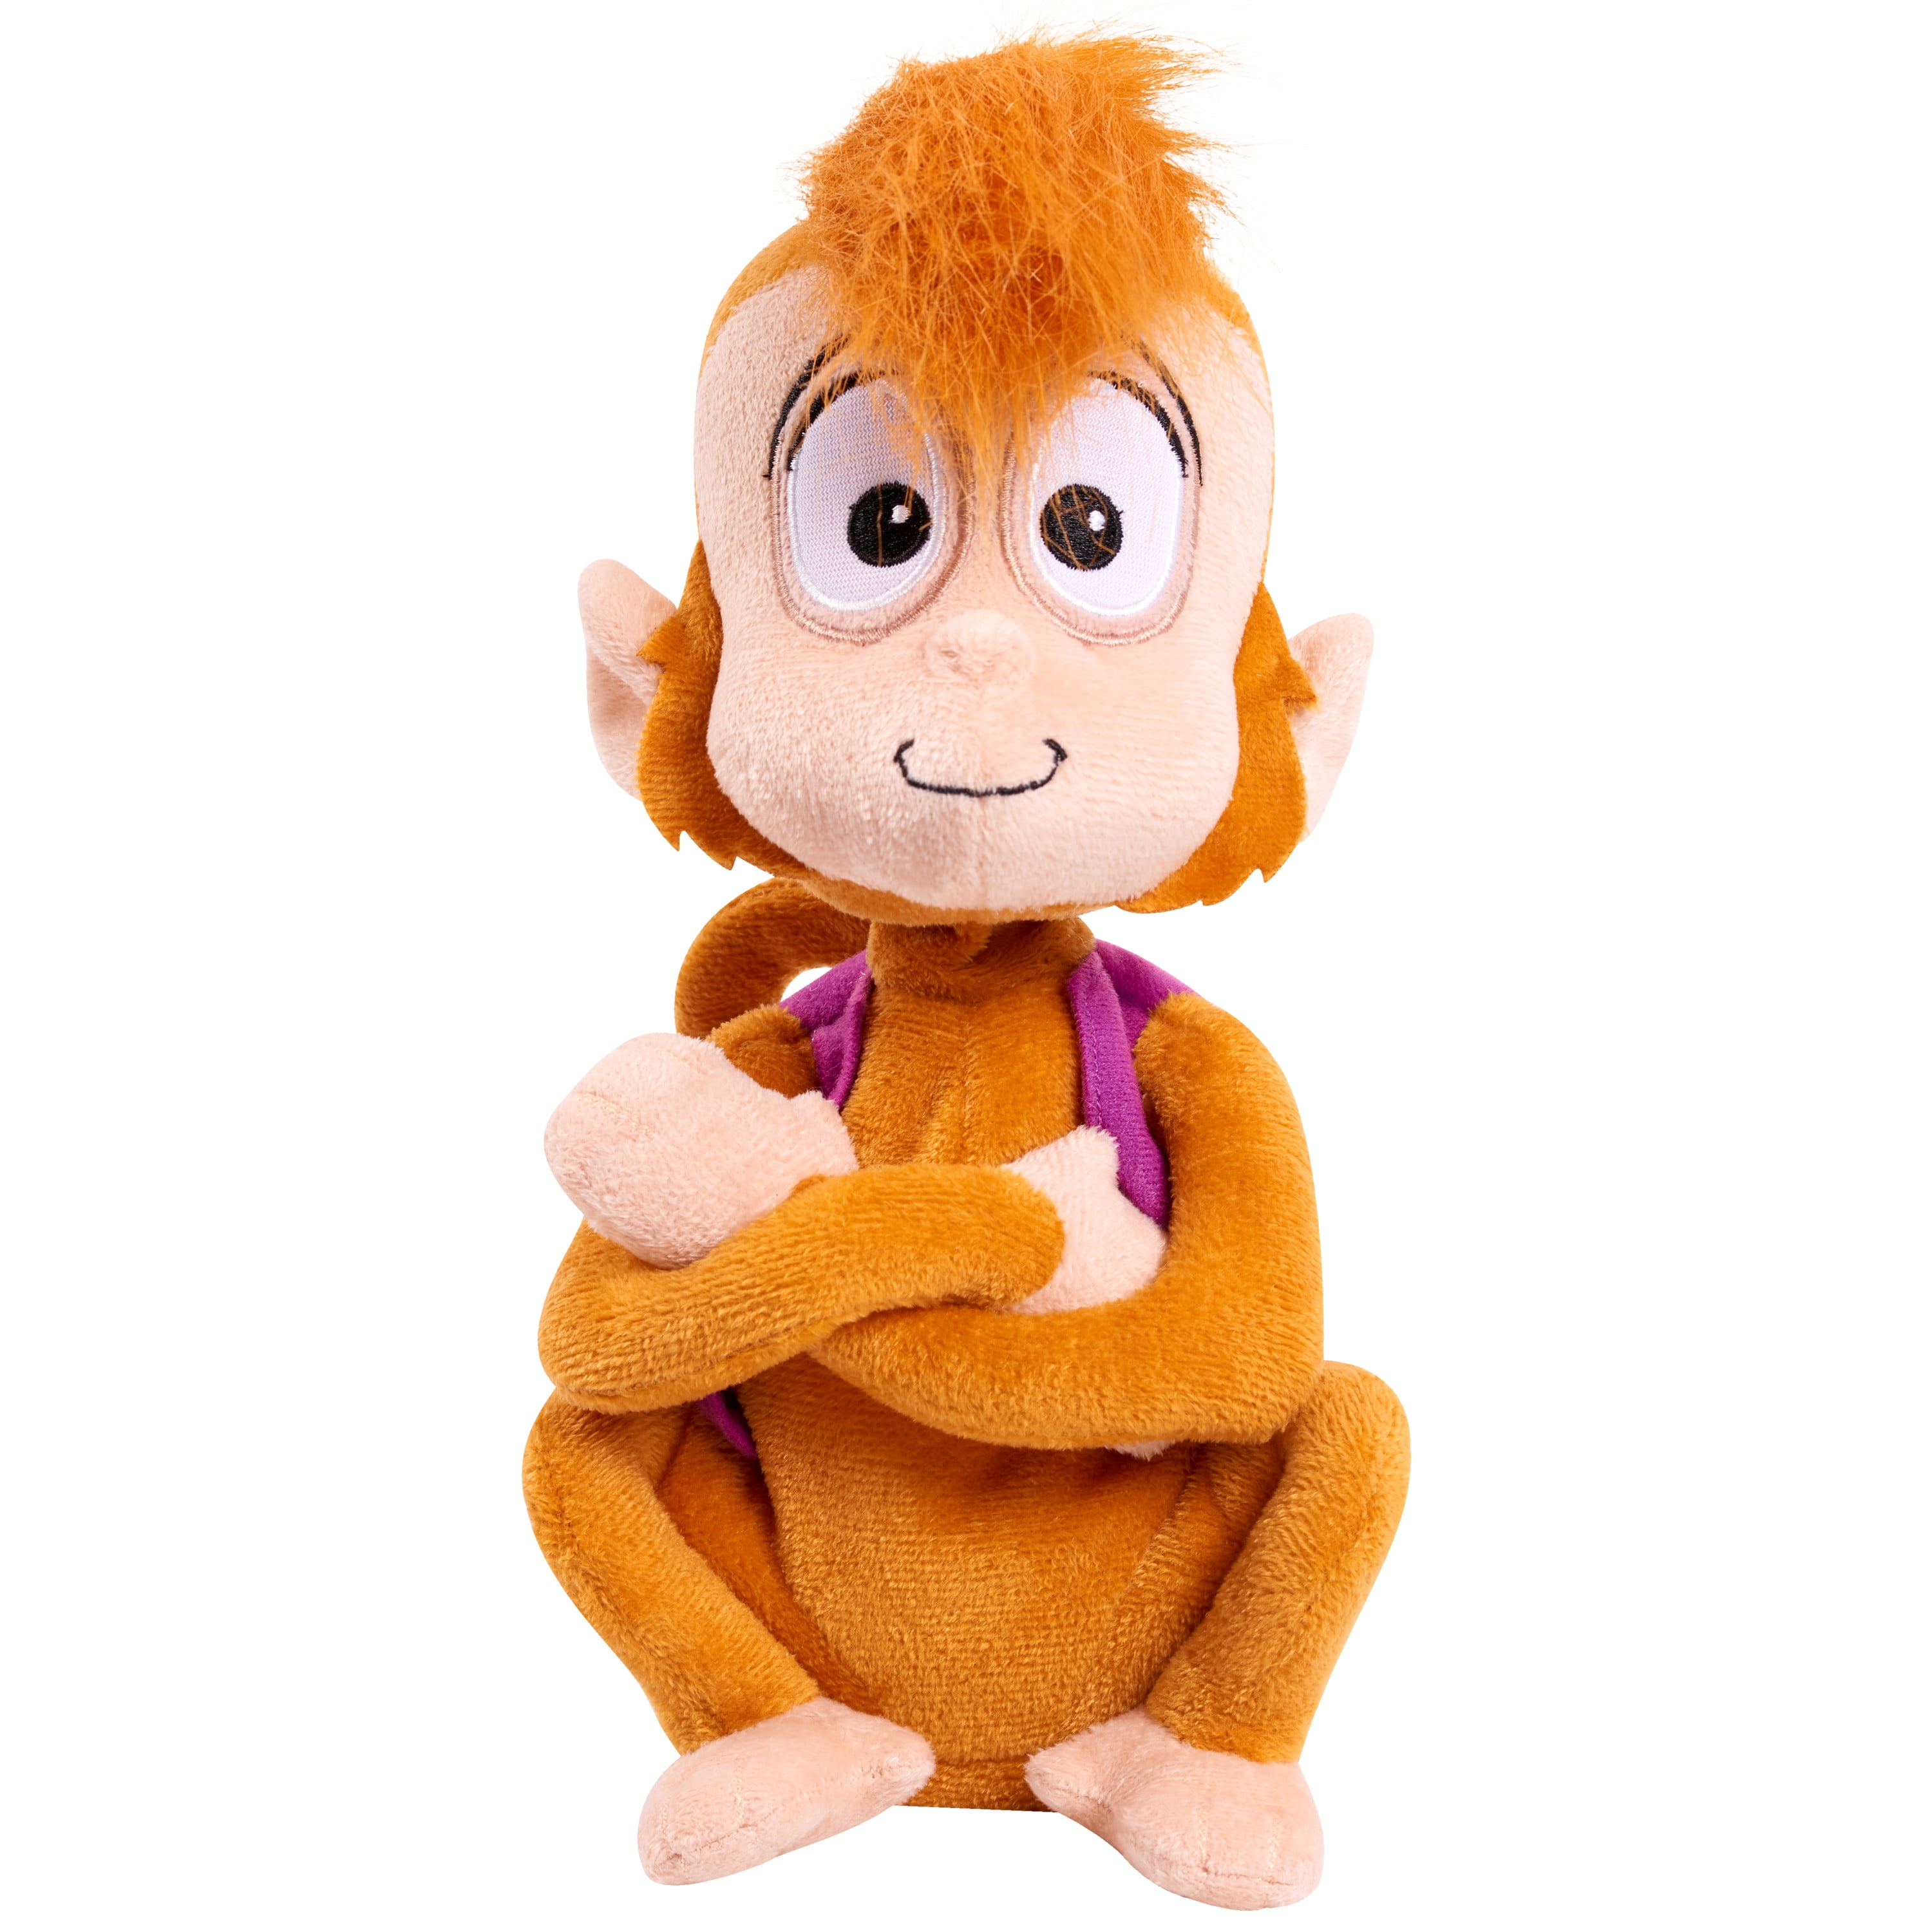 Disney Aladdin Doll Action Figure With Monkey Abu 2019 for sale online